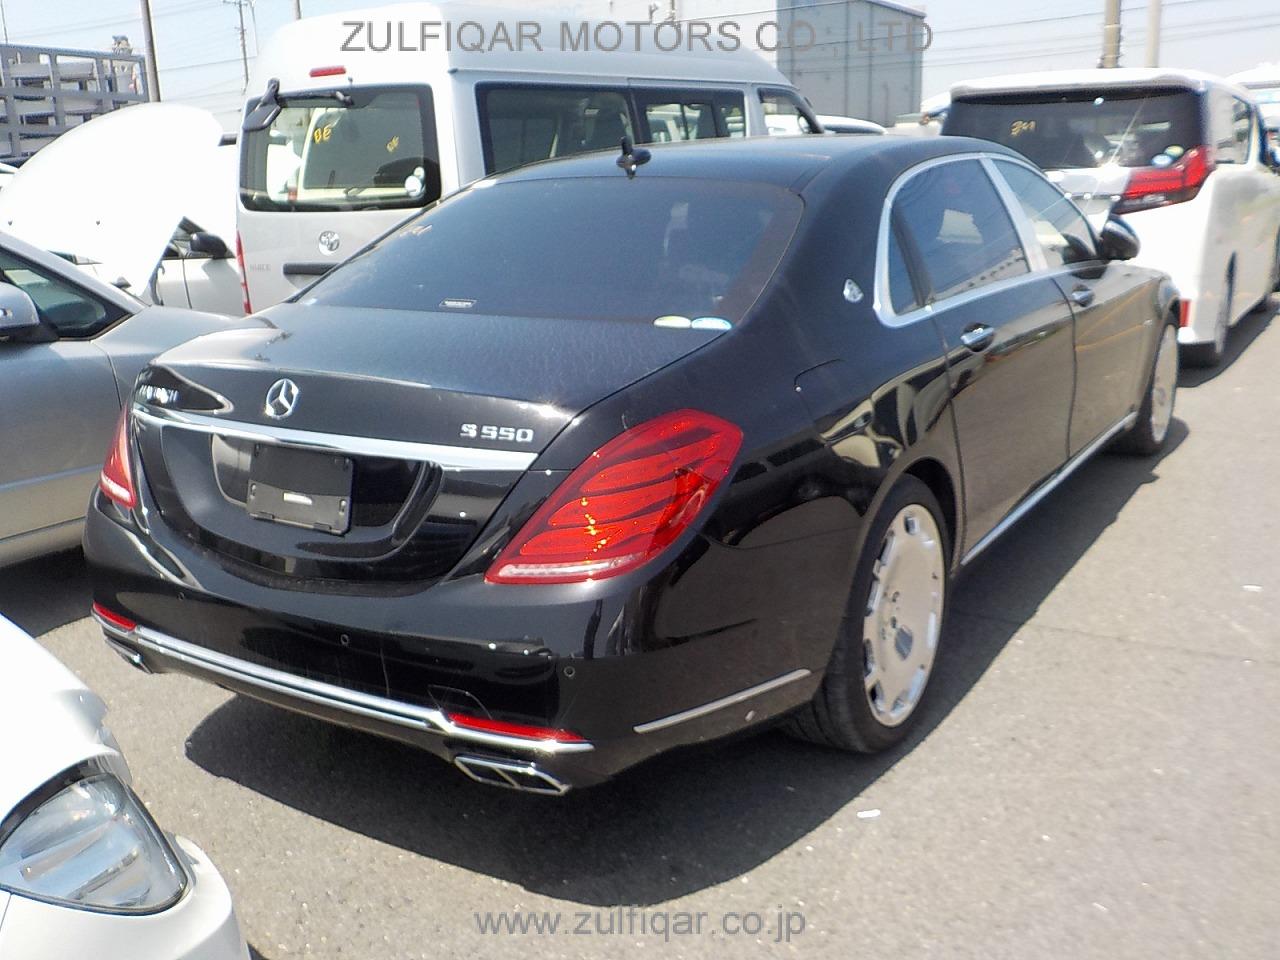 MERCEDES MAYBACH S CLASS 2016 Image 28